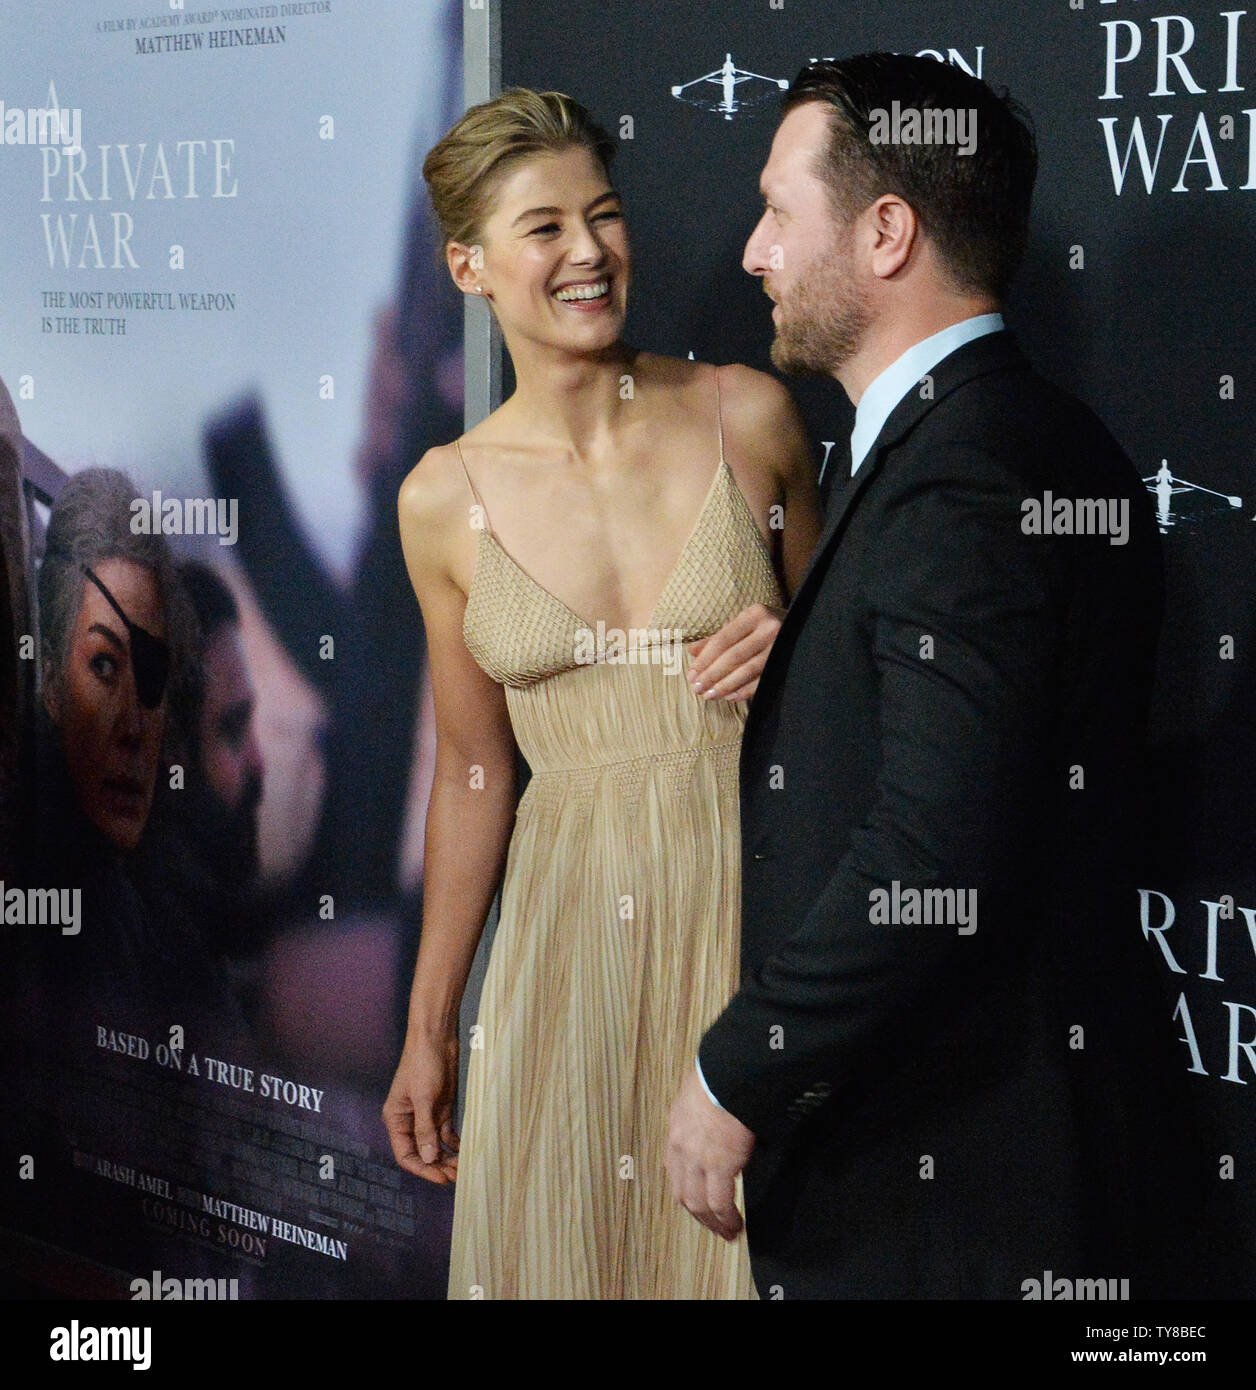 Cast member Rosamund Pike and director Matthew Heineman attend the premiere of the motion picture biographical war drama 'A Private War' at the Academy of Motion Picture Arts & Sciences in Beverly Hills, California on October 24, 2018.  The film tells the story of one of the most celebrated war correspondents of our time, Marie Colvin, who is an utterly fearless and rebellious spirit, driven to the frontline of conflicts across the globe to give voice to the voiceless. Photo by Jim Ruymen/UPI Stock Photo